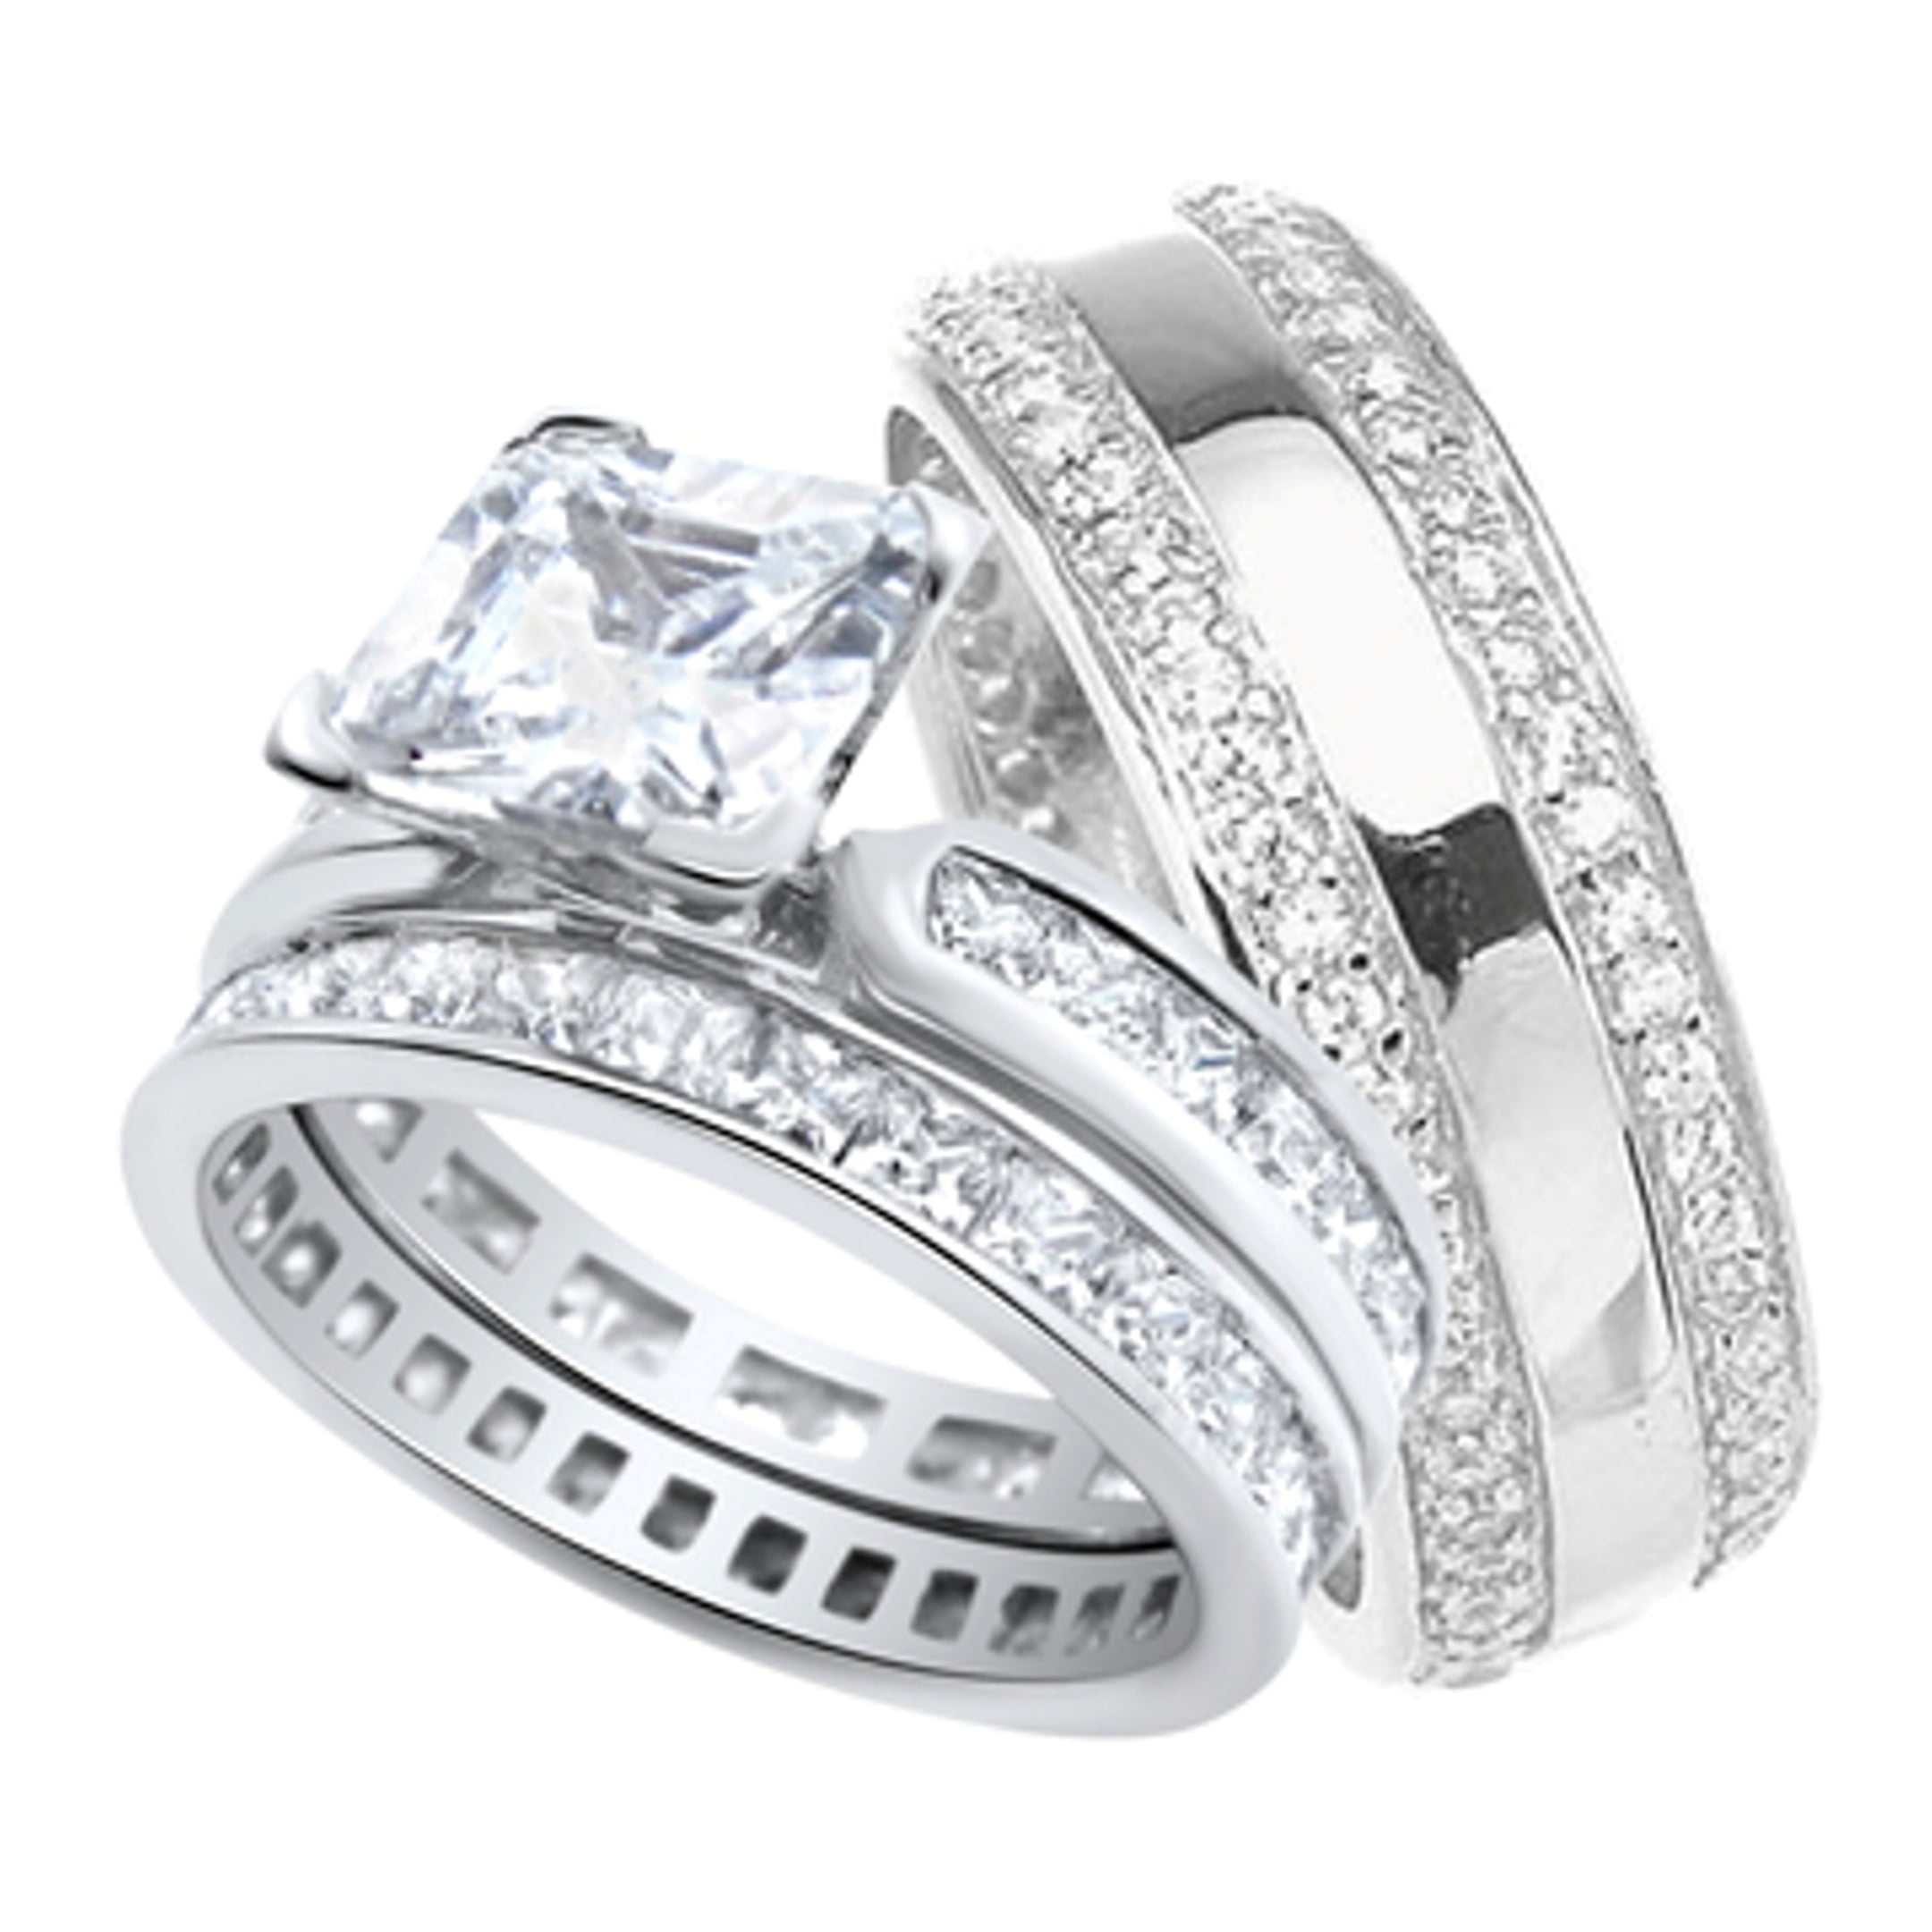 LaRaso Co His and Hers Wedding  Ring Set  Matching 